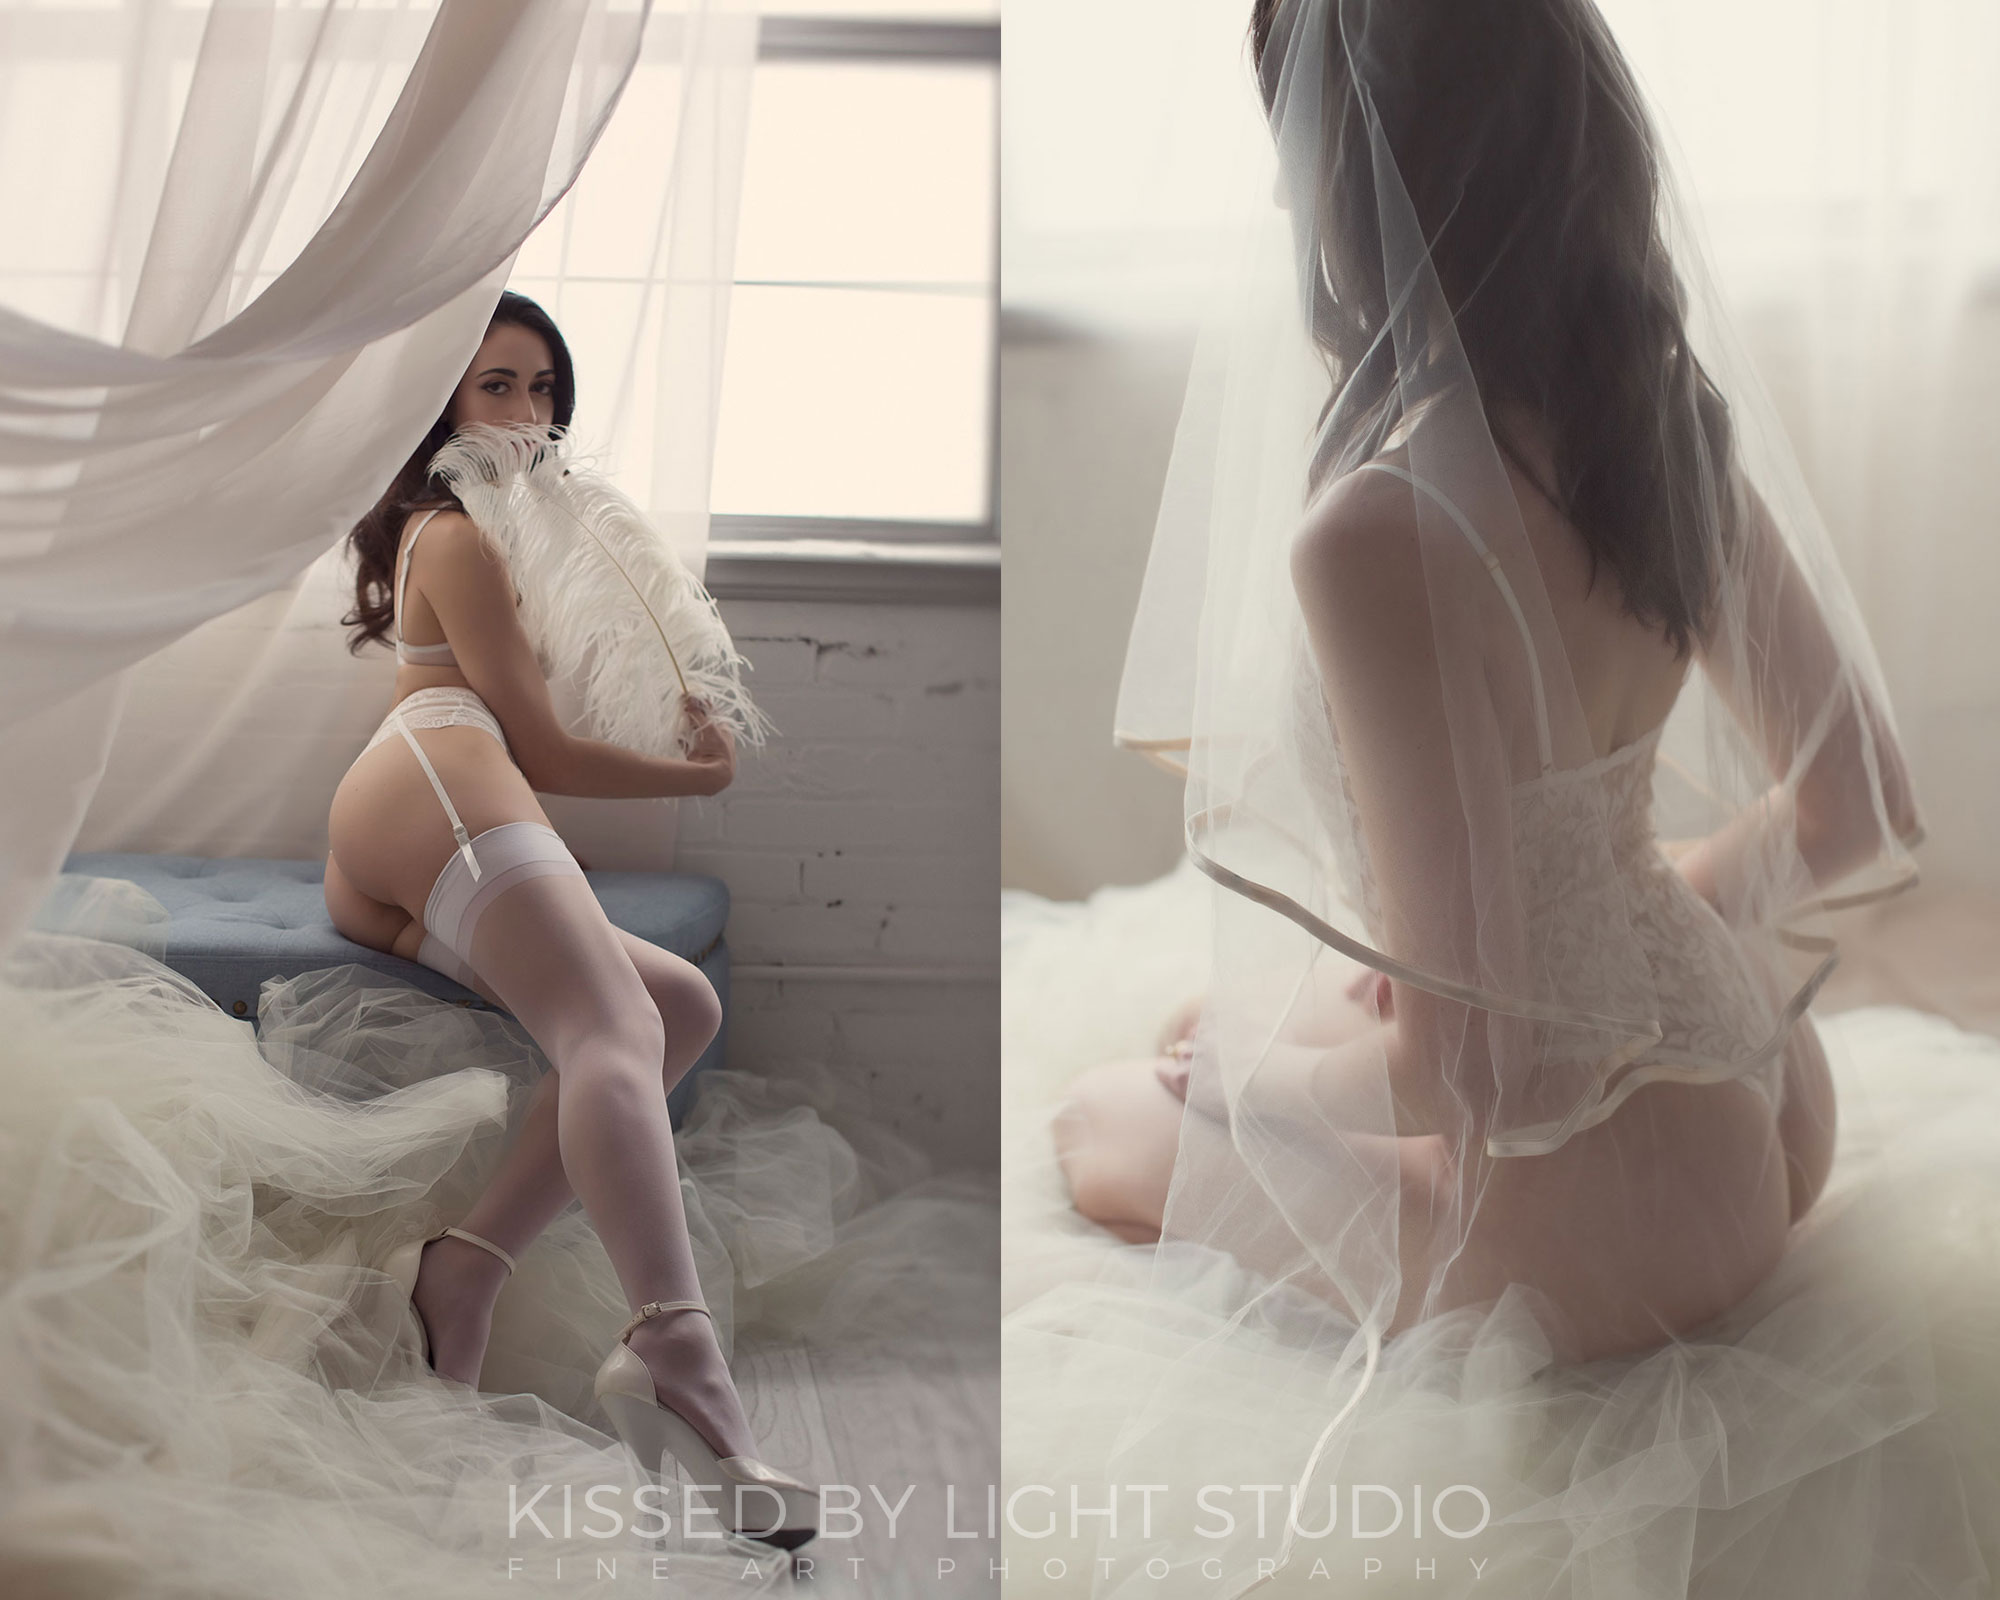 Woman in white lingerie and a veil.